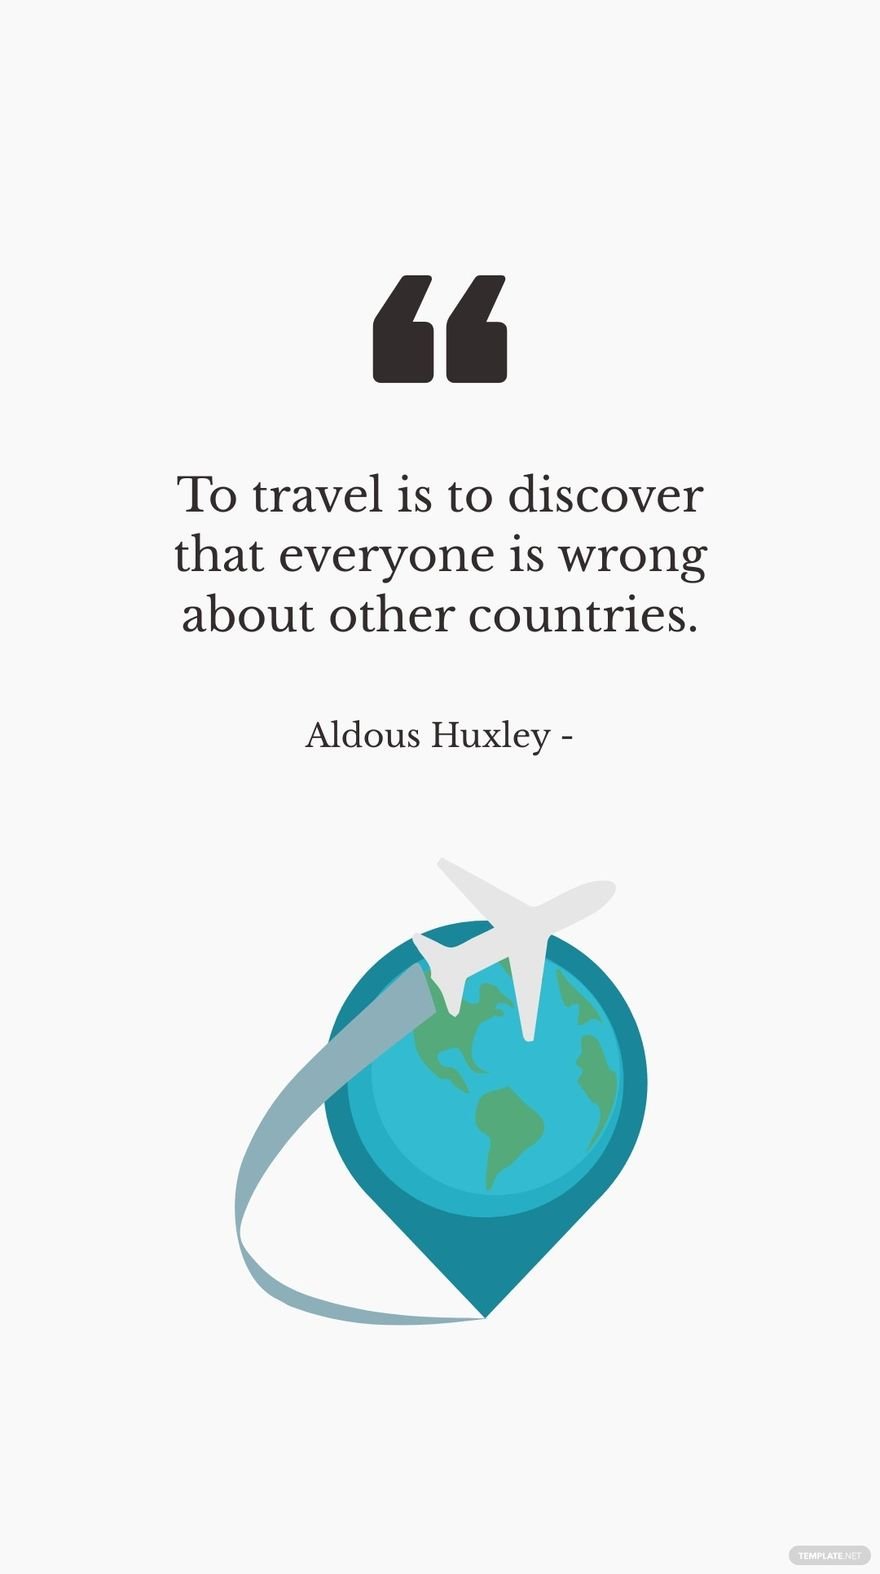 Aldous Huxley - To travel is to discover that everyone is wrong about other countries.